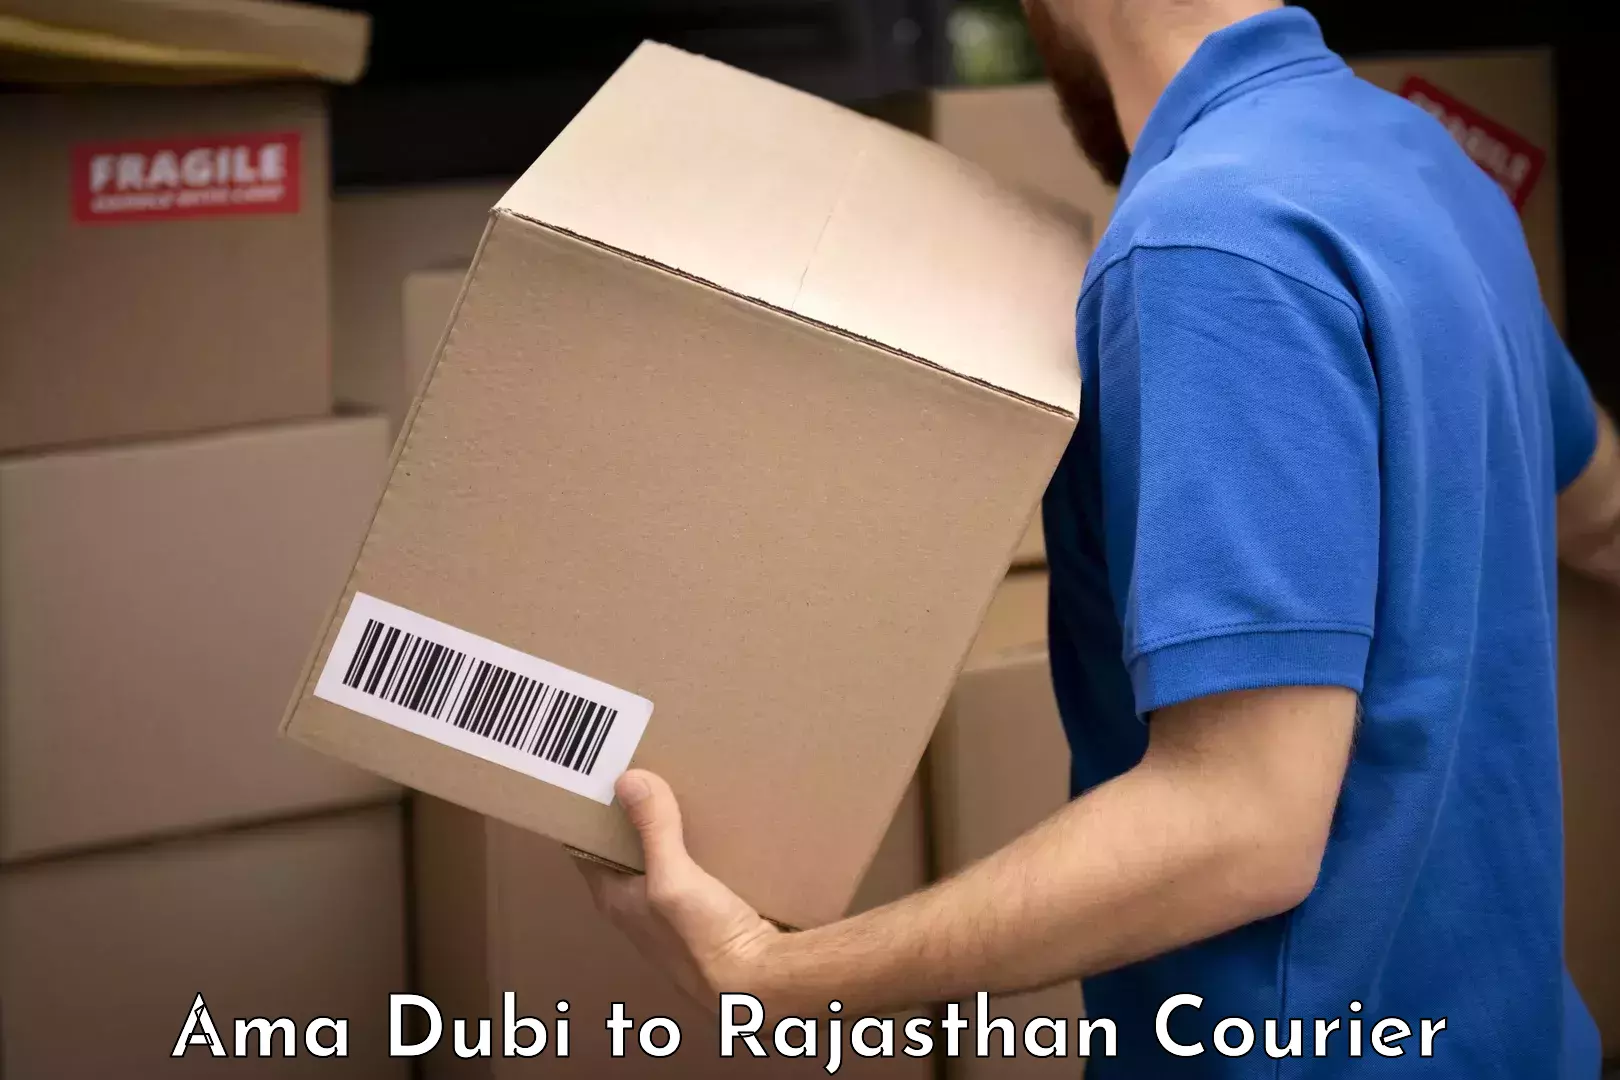 Luggage shipping planner Ama Dubi to Rajasthan